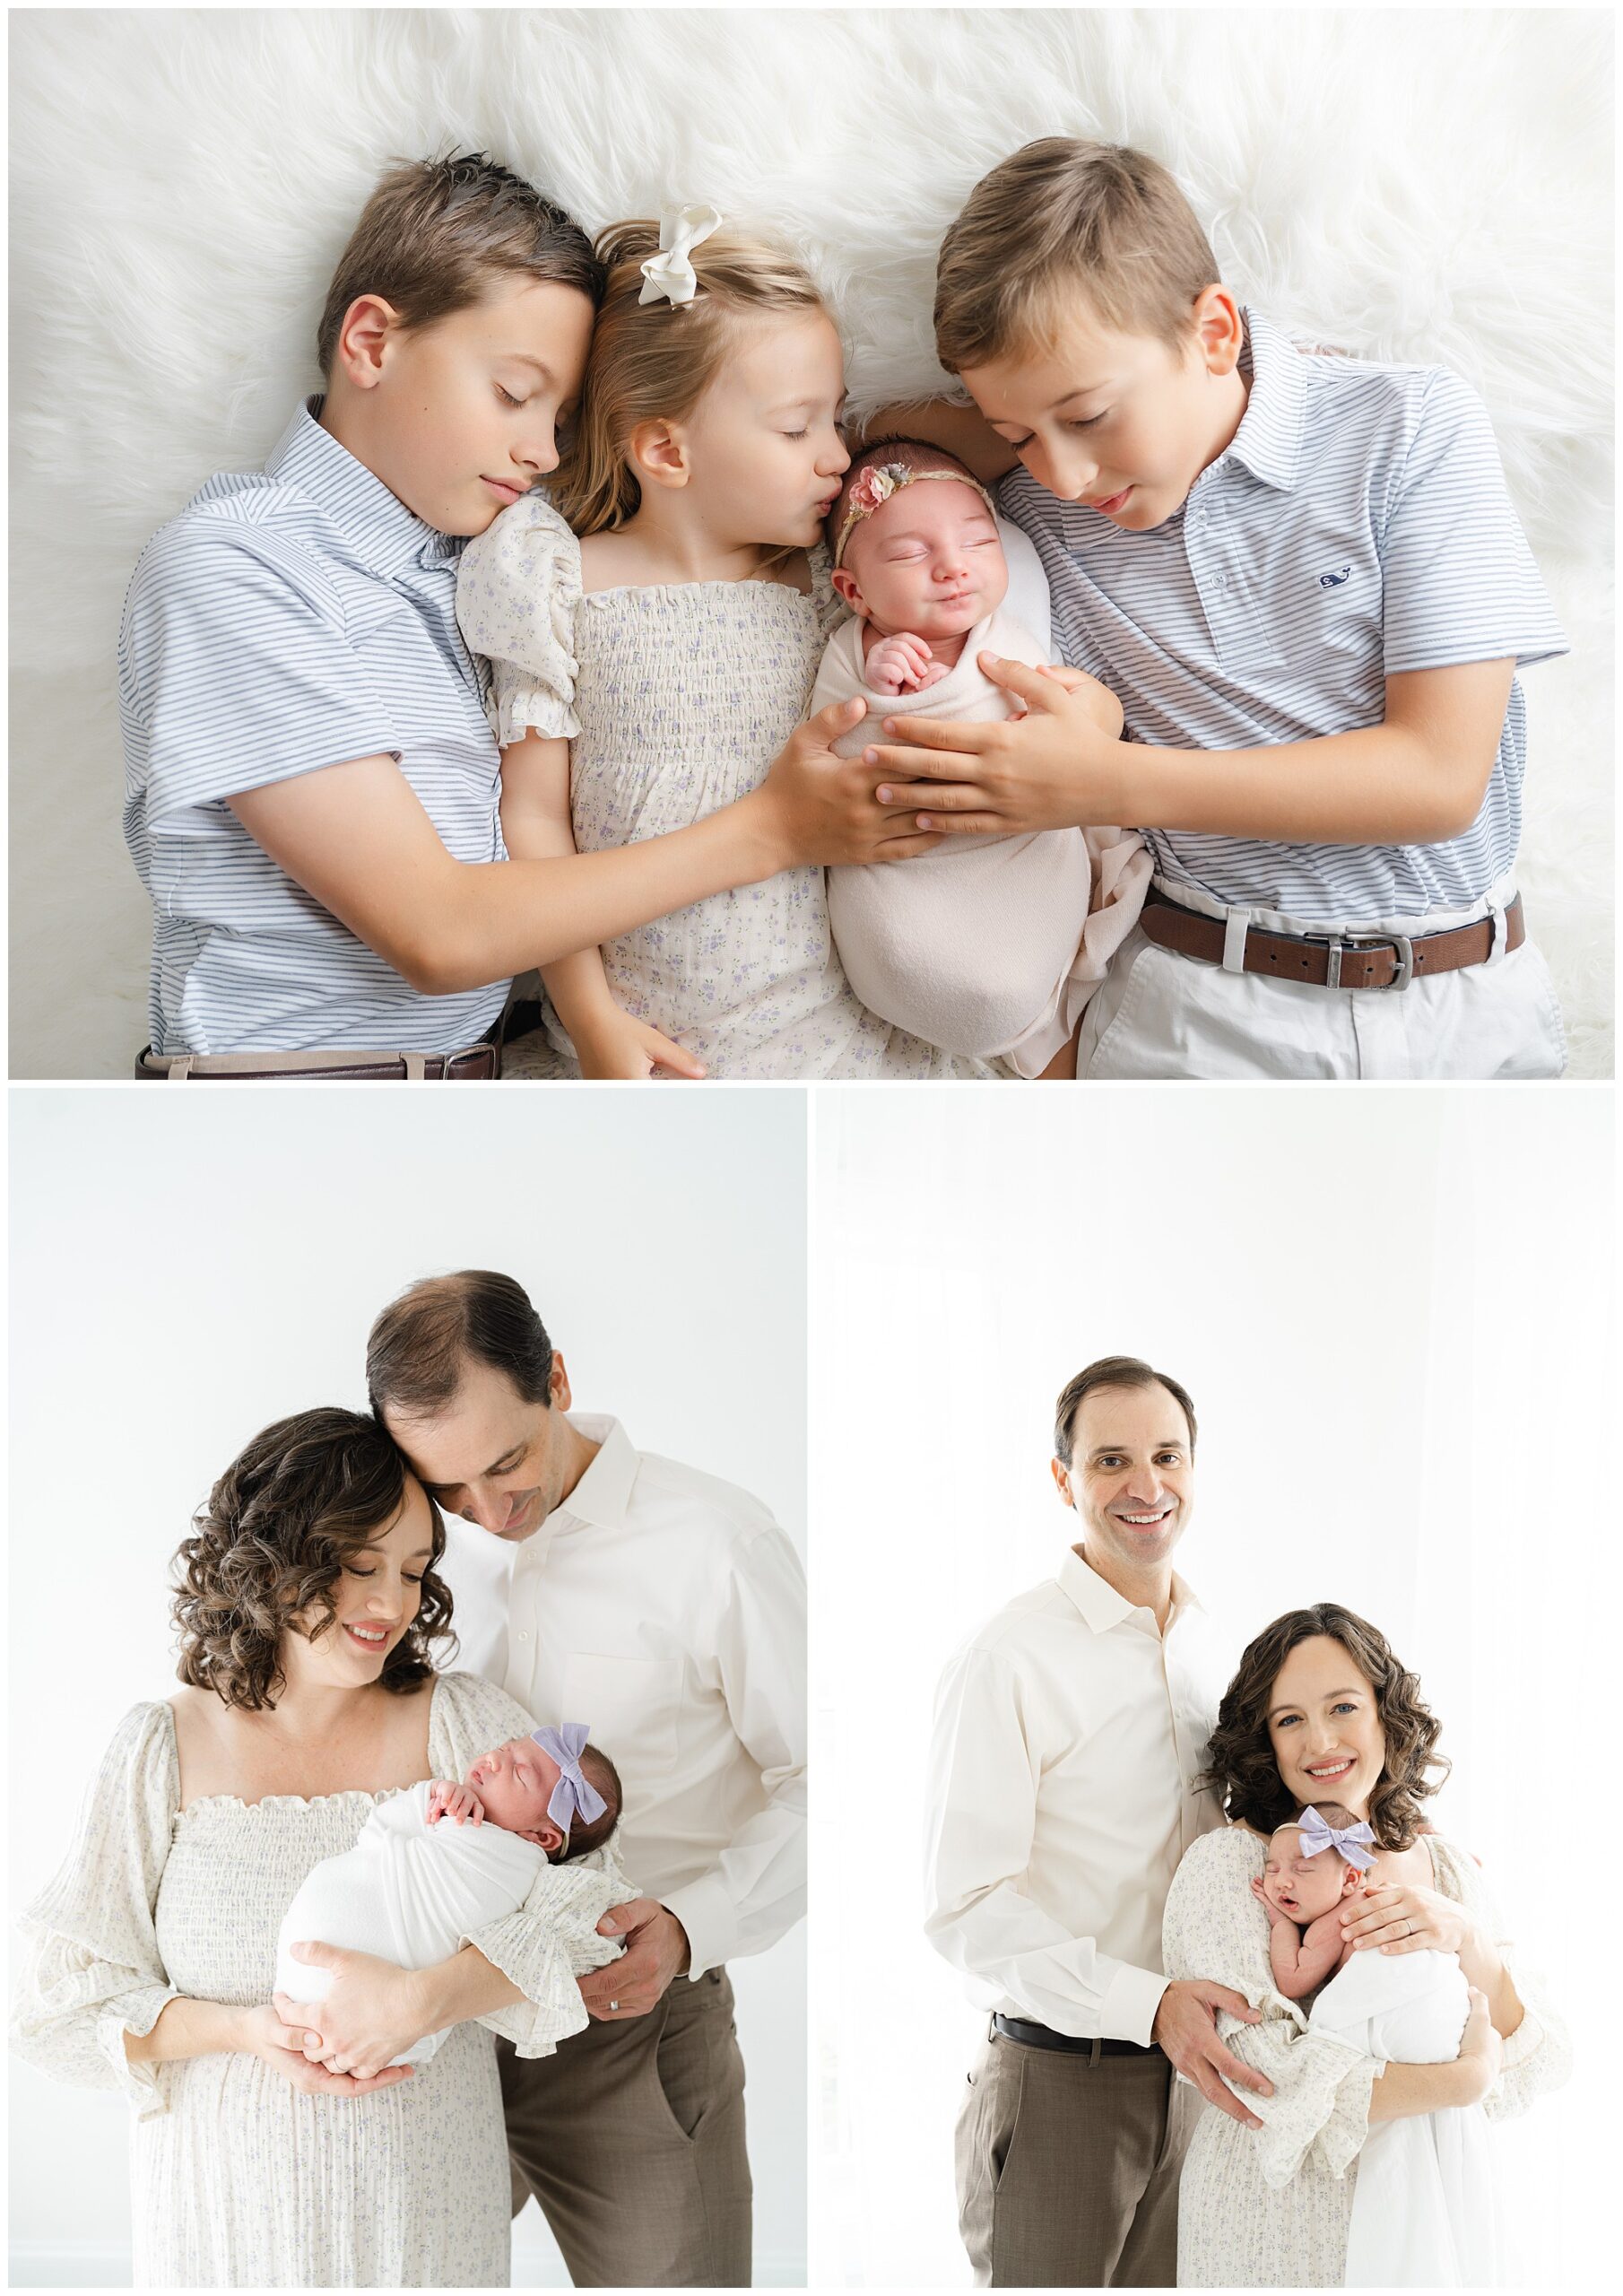 Marietta newborn portraits of a baby with her parents and three older siblings.